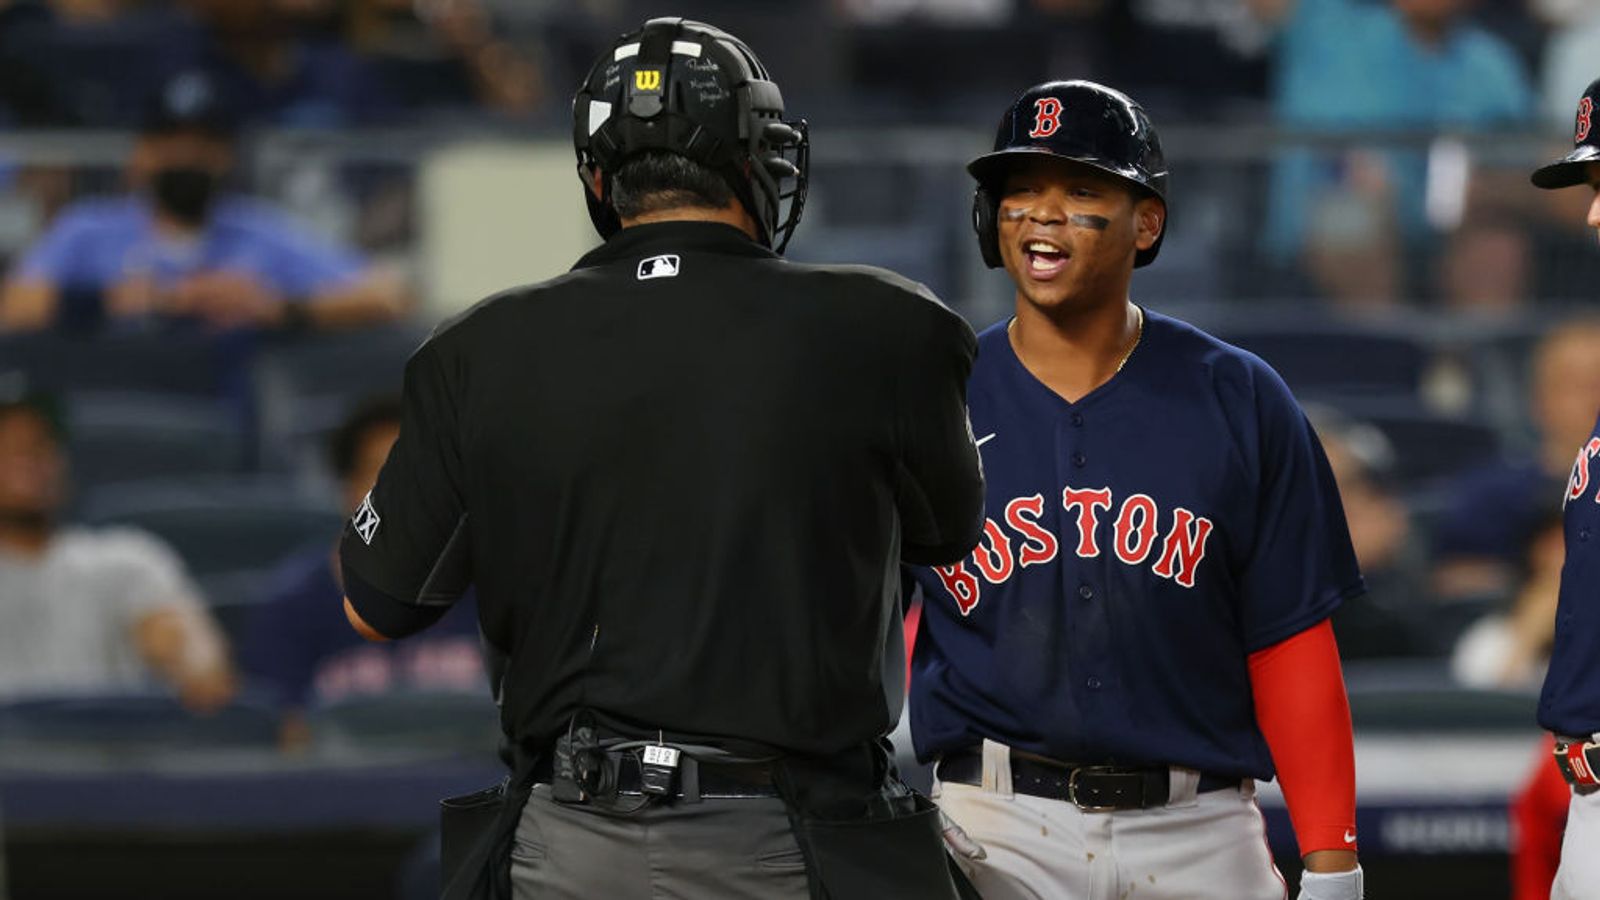 BSJ Game Report: Red Sox 11, Cubs 5 - Yoshida supports strong